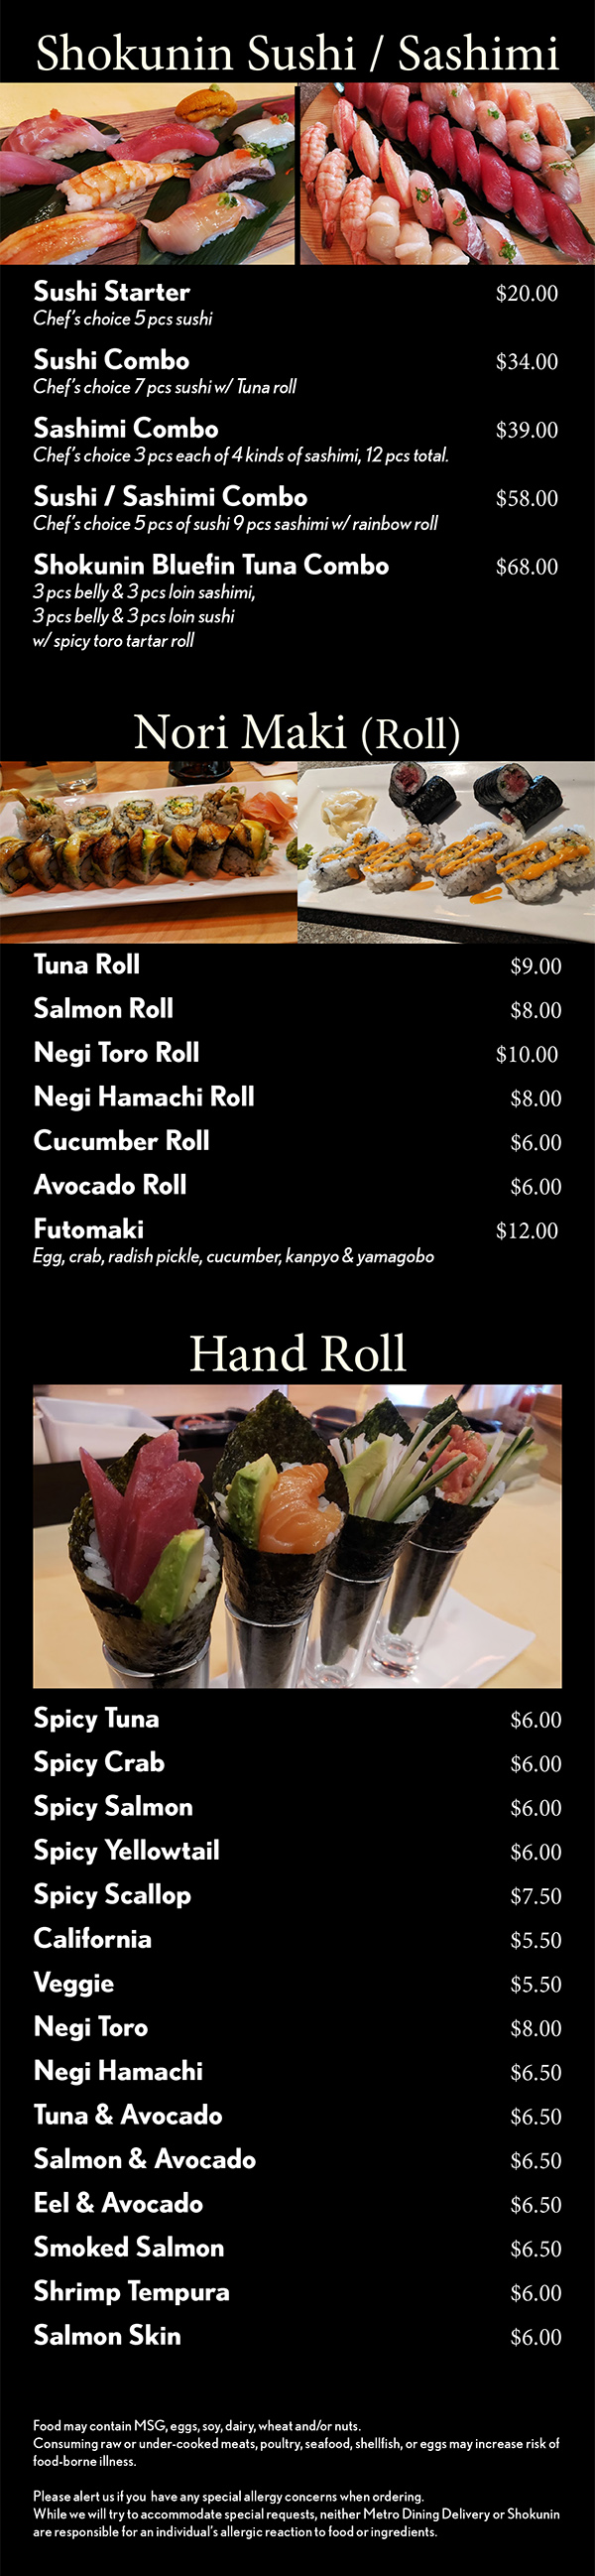 Shokunin Sushi / Sashimi



Sushi Combo				$24
Chef’s choice 7 pcs sushi w/ Tuna roll 
Sashimi Combo				$34
Chef’s choice 3 pcs each of 5 kinds of sashimi,
15 pcs total. 
Sushi / Sashimi Combo		$45
Chef’s choice 5 pcs of sushi 9 pcs sashimi
w/ rainbow roll
Shokunin Bluefin Tuna Combo	$49
3 pcs belly & 3 pcs loin sashimi, 3 pcs belly 
& 3 pcs loin sushi w/ spicy toro tartar roll 
Chef Special	Nigiri Combo A	$60
				Nigiri Combo B	$90
				Nigiri Combo C  $120

Chef’s Selection Sashimi (5 pcs)
Bluefin Tuna Belly   Toro		$24
Bluefin Tuna   Hon Maguro		$18
Salmon   Sake					$14
Salmon Belly   Sake Toro		$18
Yellowtail   Hamachi	  		$14
Yellowtail Belly   Hamachi Toro	$18
Sea Bass     Szuki				$14
Japanese Sea Bream    Madai	$18
Fluke     Hirame					$14
Octopus     Tako				$14
Albacore   Bincho Maguro		$14
Amberjack     Kampachi			$14
Seared Beef     Gyu				$14
Steamed Monkfish Liver     Ankimo	$16


Food may contain MSG, eggs, soy, dairy, wheat and/or nuts.
Consuming raw or under-cooked meats, poultry, seafood, shellfish, or eggs may increase risk of food-borne illness.

Please alert us if you  have any special allergy concerns when ordering.
While we will try to accommodate special requests, neither Metro Dining Delivery or Shokunin are responsible for an individual’s allergic reaction to food or ingredients.